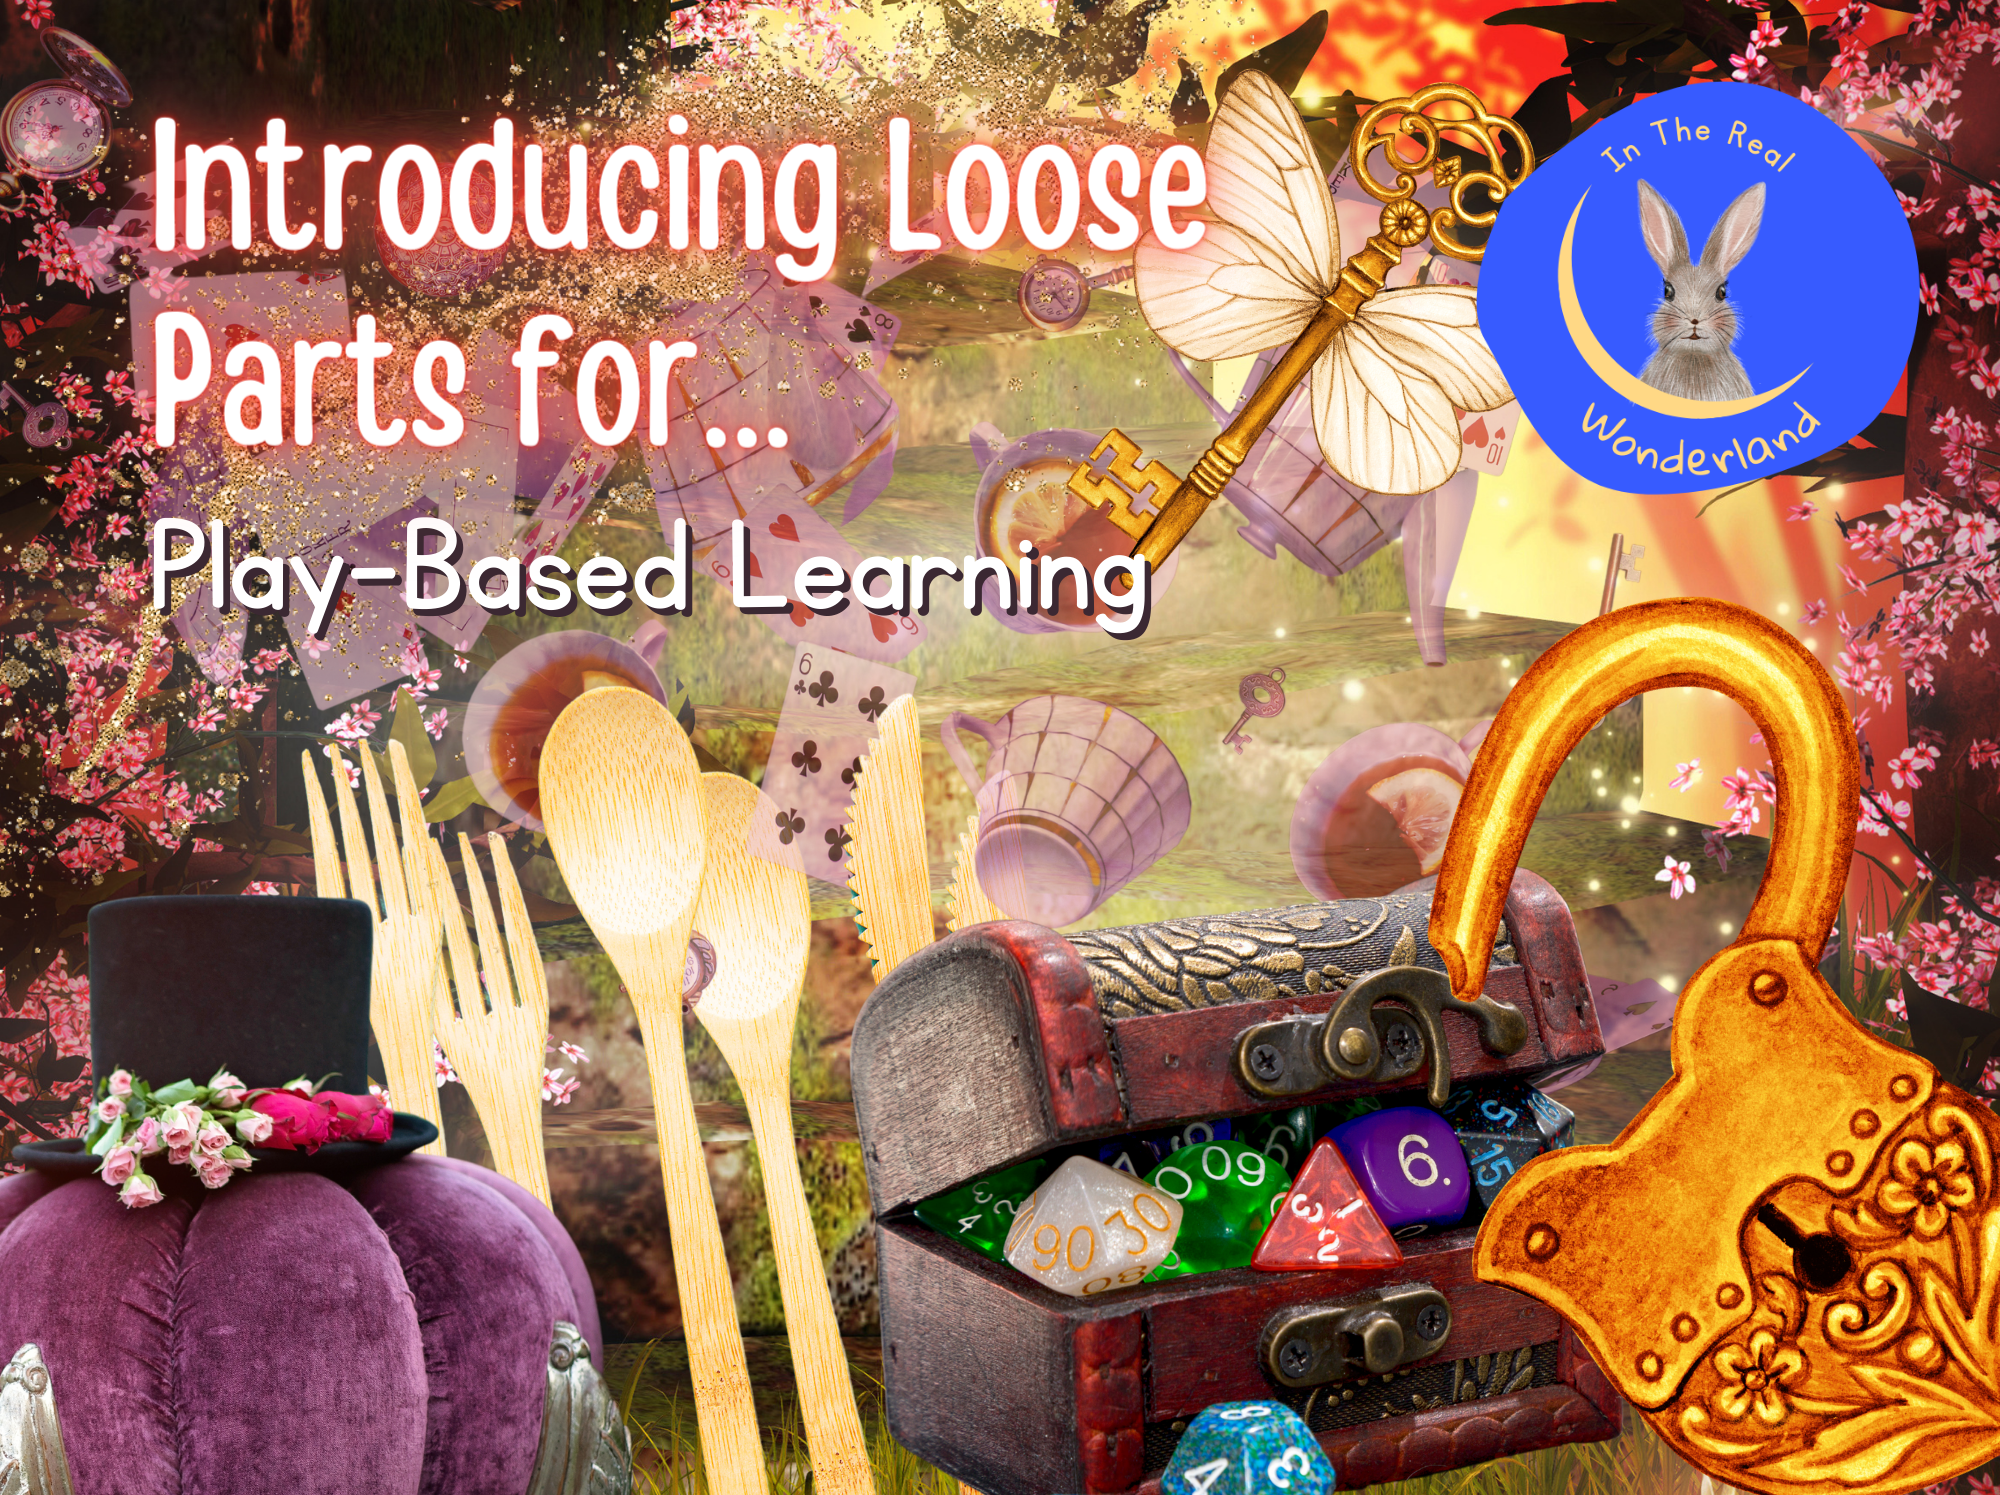 The Learning in Loose Parts